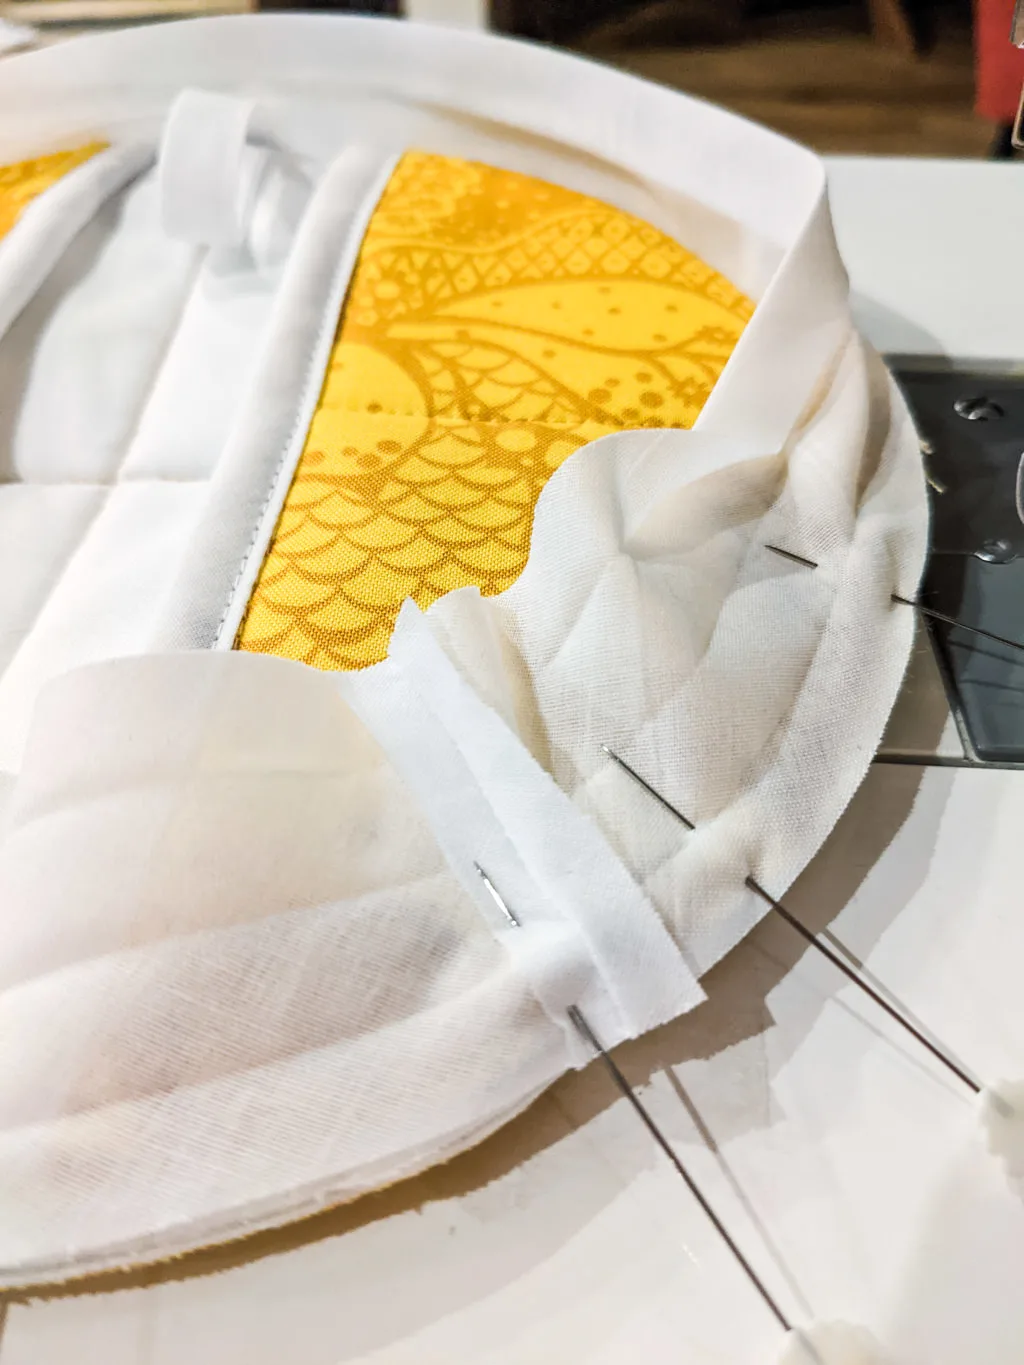 Sewing binding tape onto a DIY quilted potholder